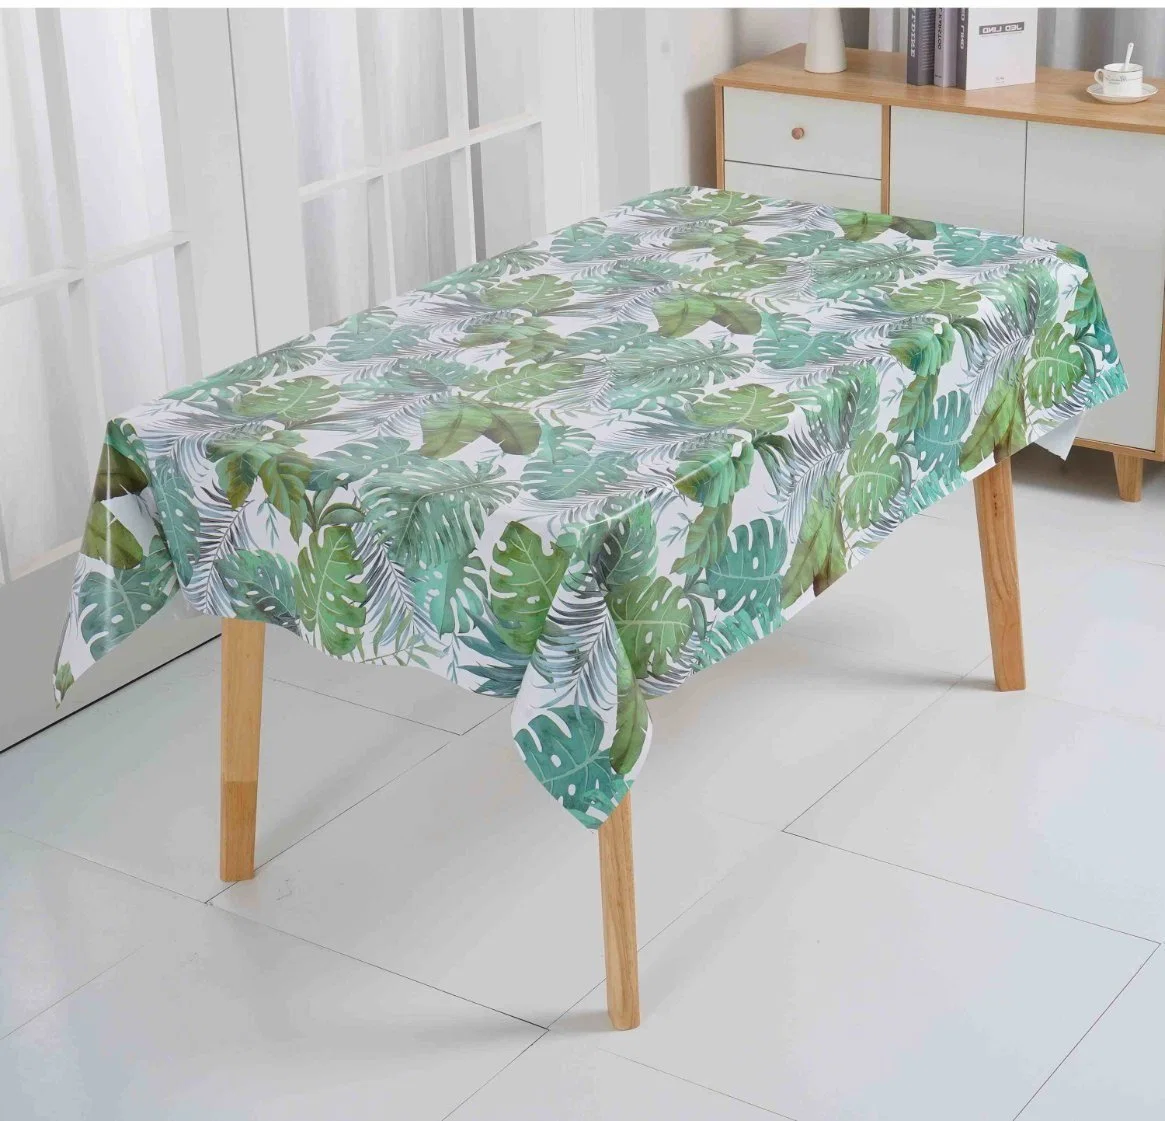 Abaxial Leaf Printed Table Cloth Plastic PVC Vinyl Tablecloth for Party Picnic Camping